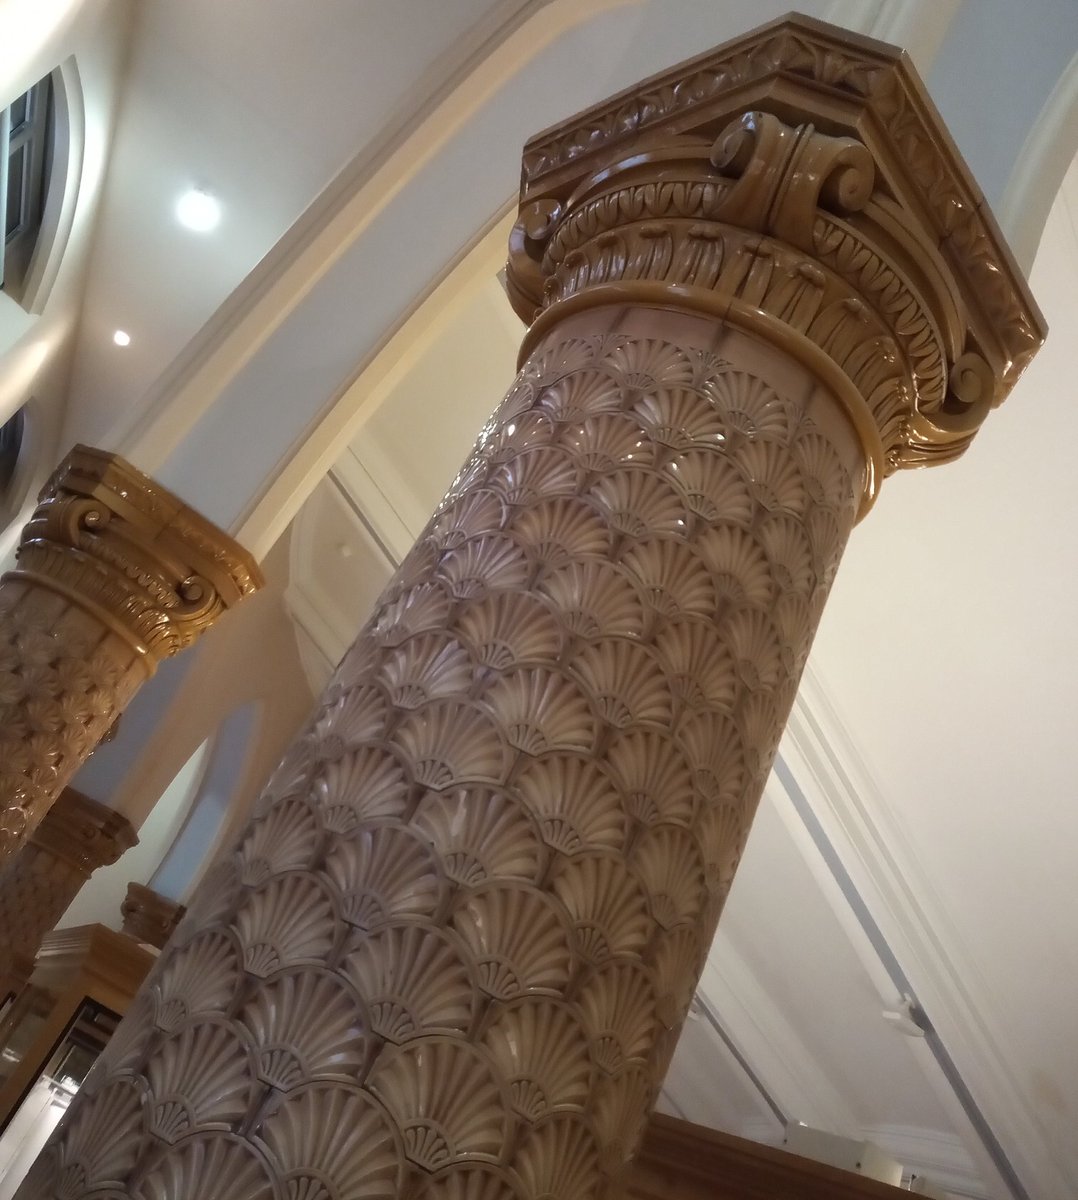 Big thanks to @drSallyBD and @drannaburton for the extremely well-organised and productive @ERebellions symposium for the @TheBSLS. Pic related: a shell-column at the nearby @VictoriaGallery.